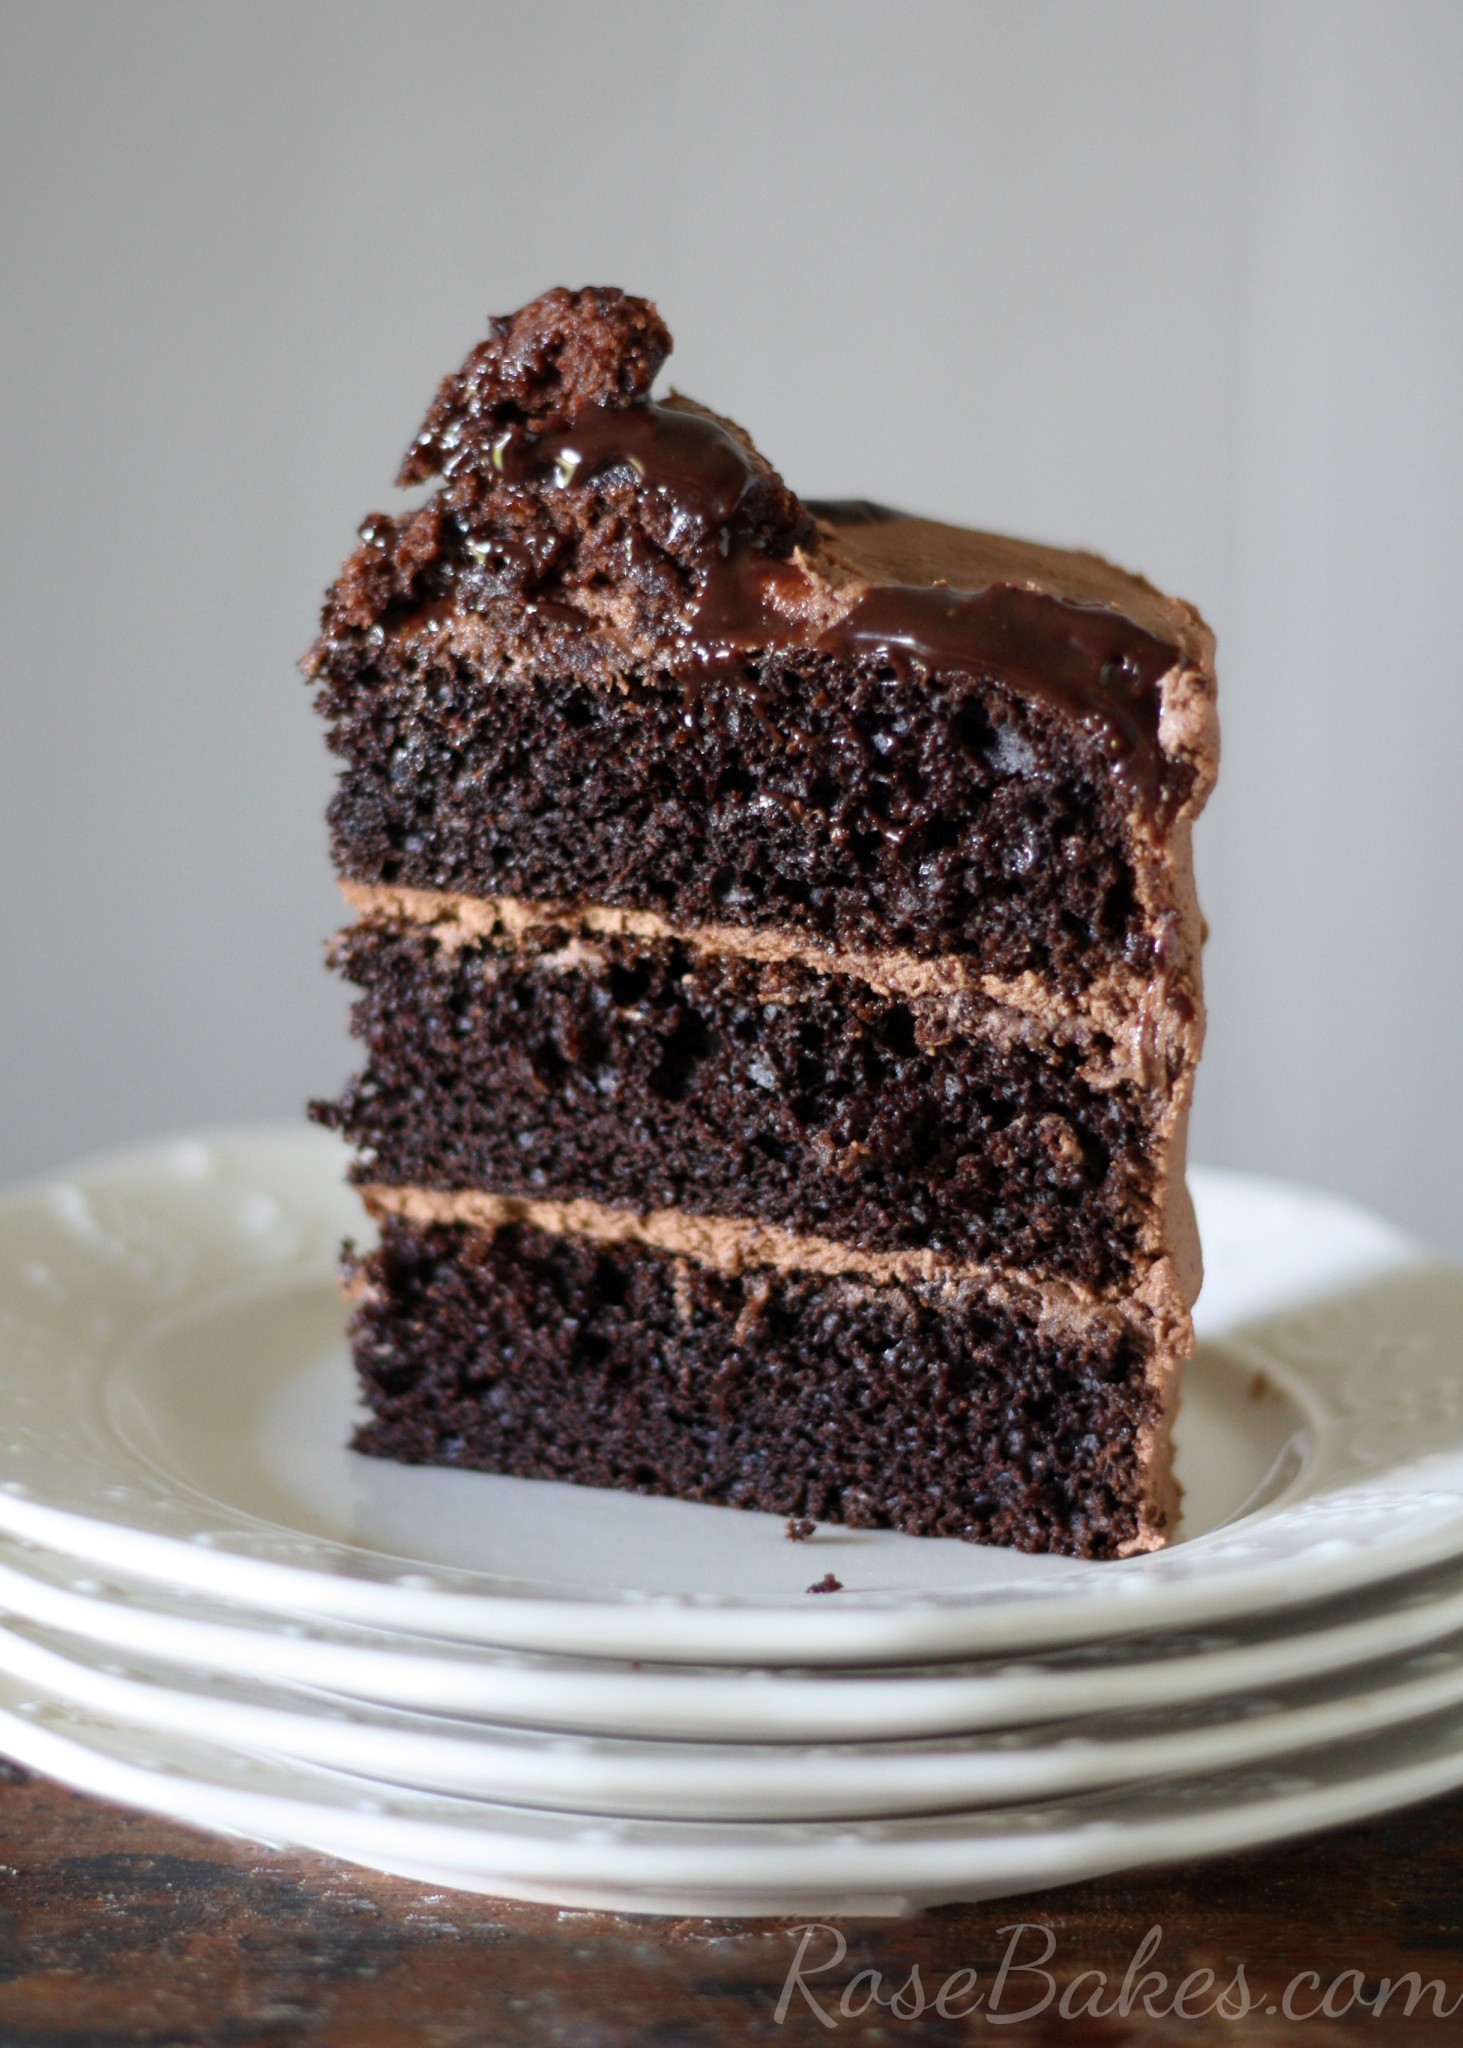 How To Make A Chocolate Cake From Scratch
 e Bowl Chocolate Cake from scratch Rose Bakes